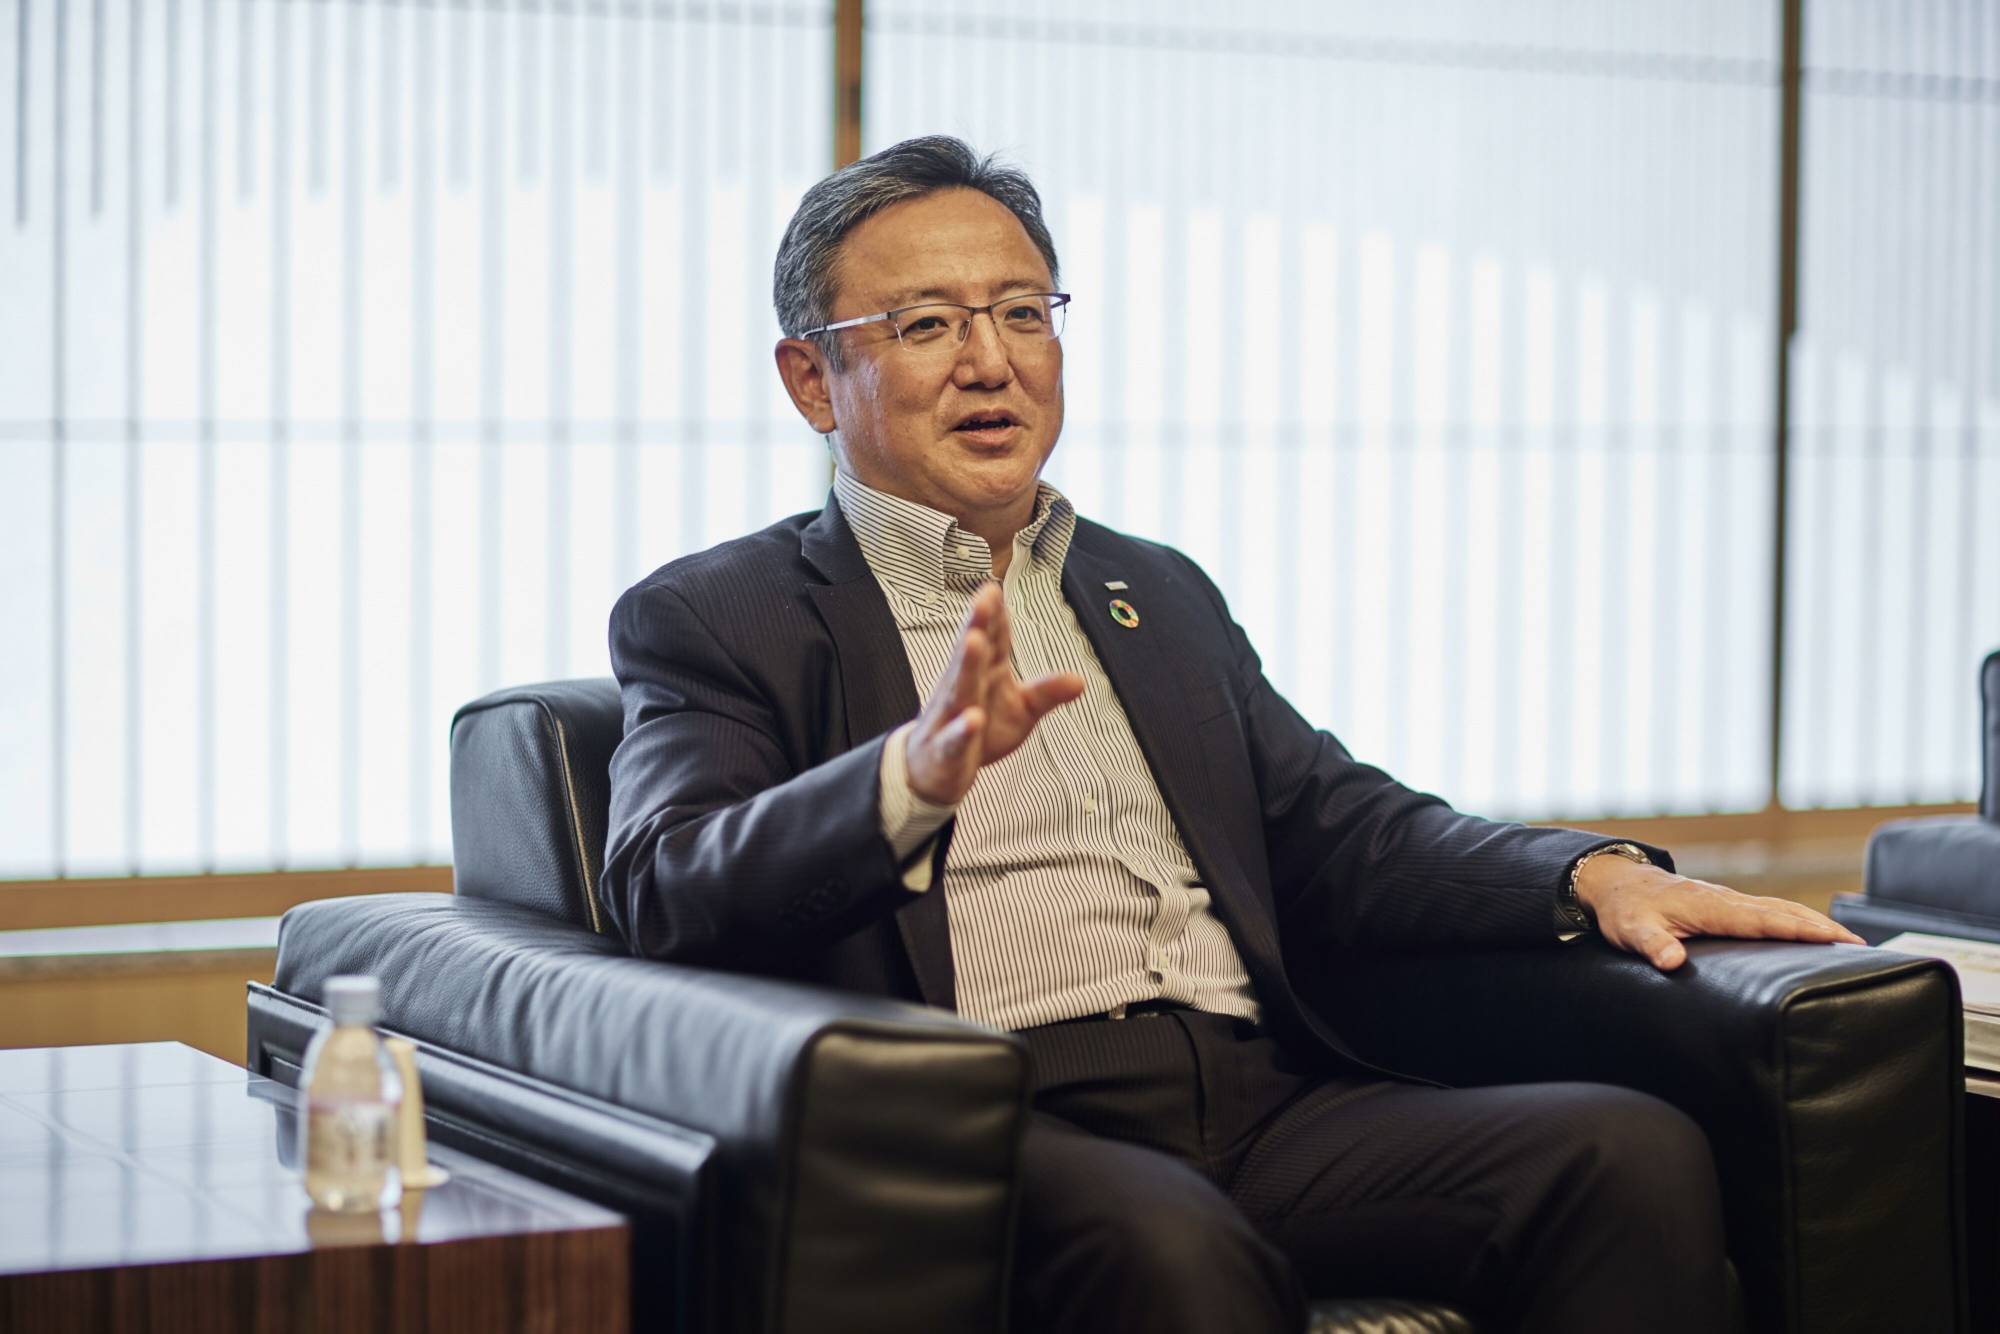 Yoshiro Hamamoto, chief executive officer of Mizuho Securities, says the firm's U.S. unit plans to recruit more than 100 people by the end of March next year. | BLOOMBERG